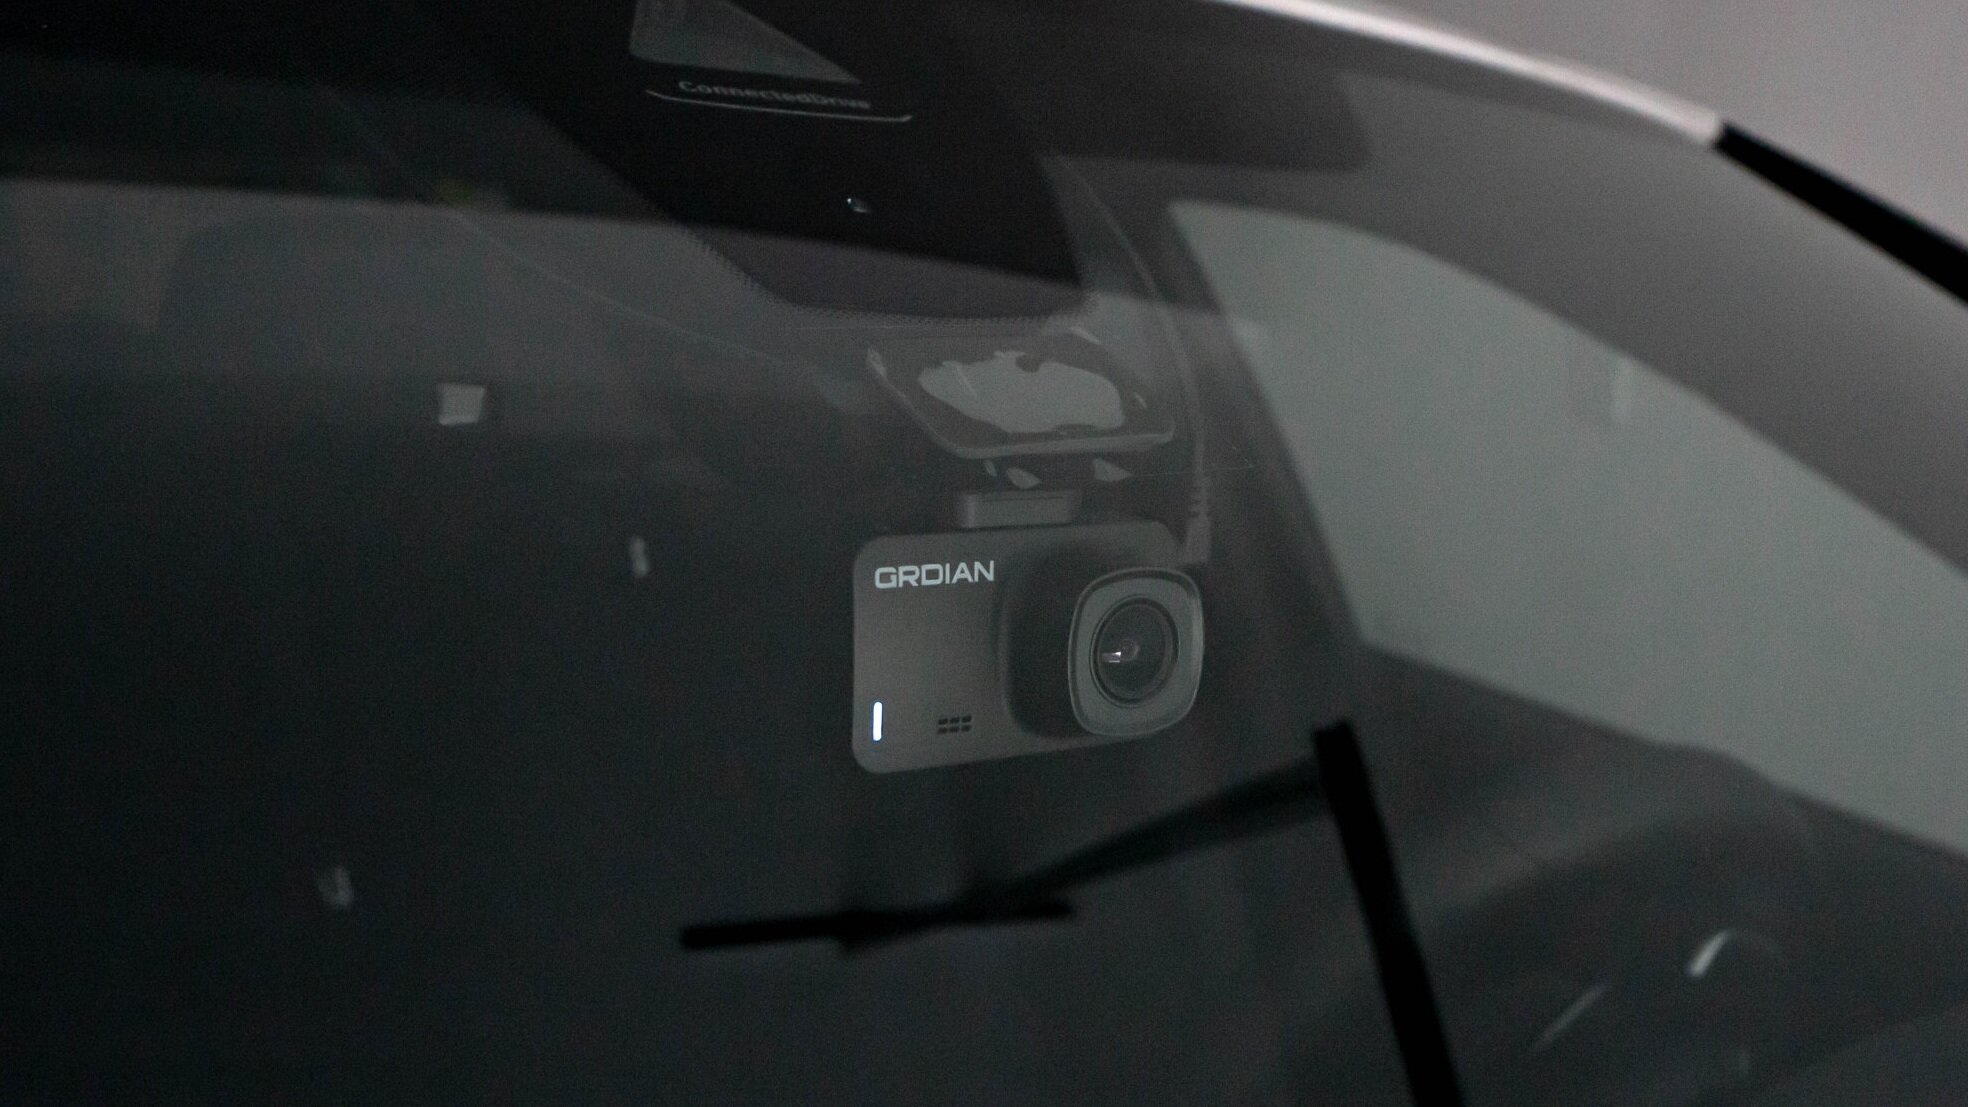 Complete Guide to Installing a Dashcam in Your Car - Tips, Guides, &  Tutorials for Your Dash Cam